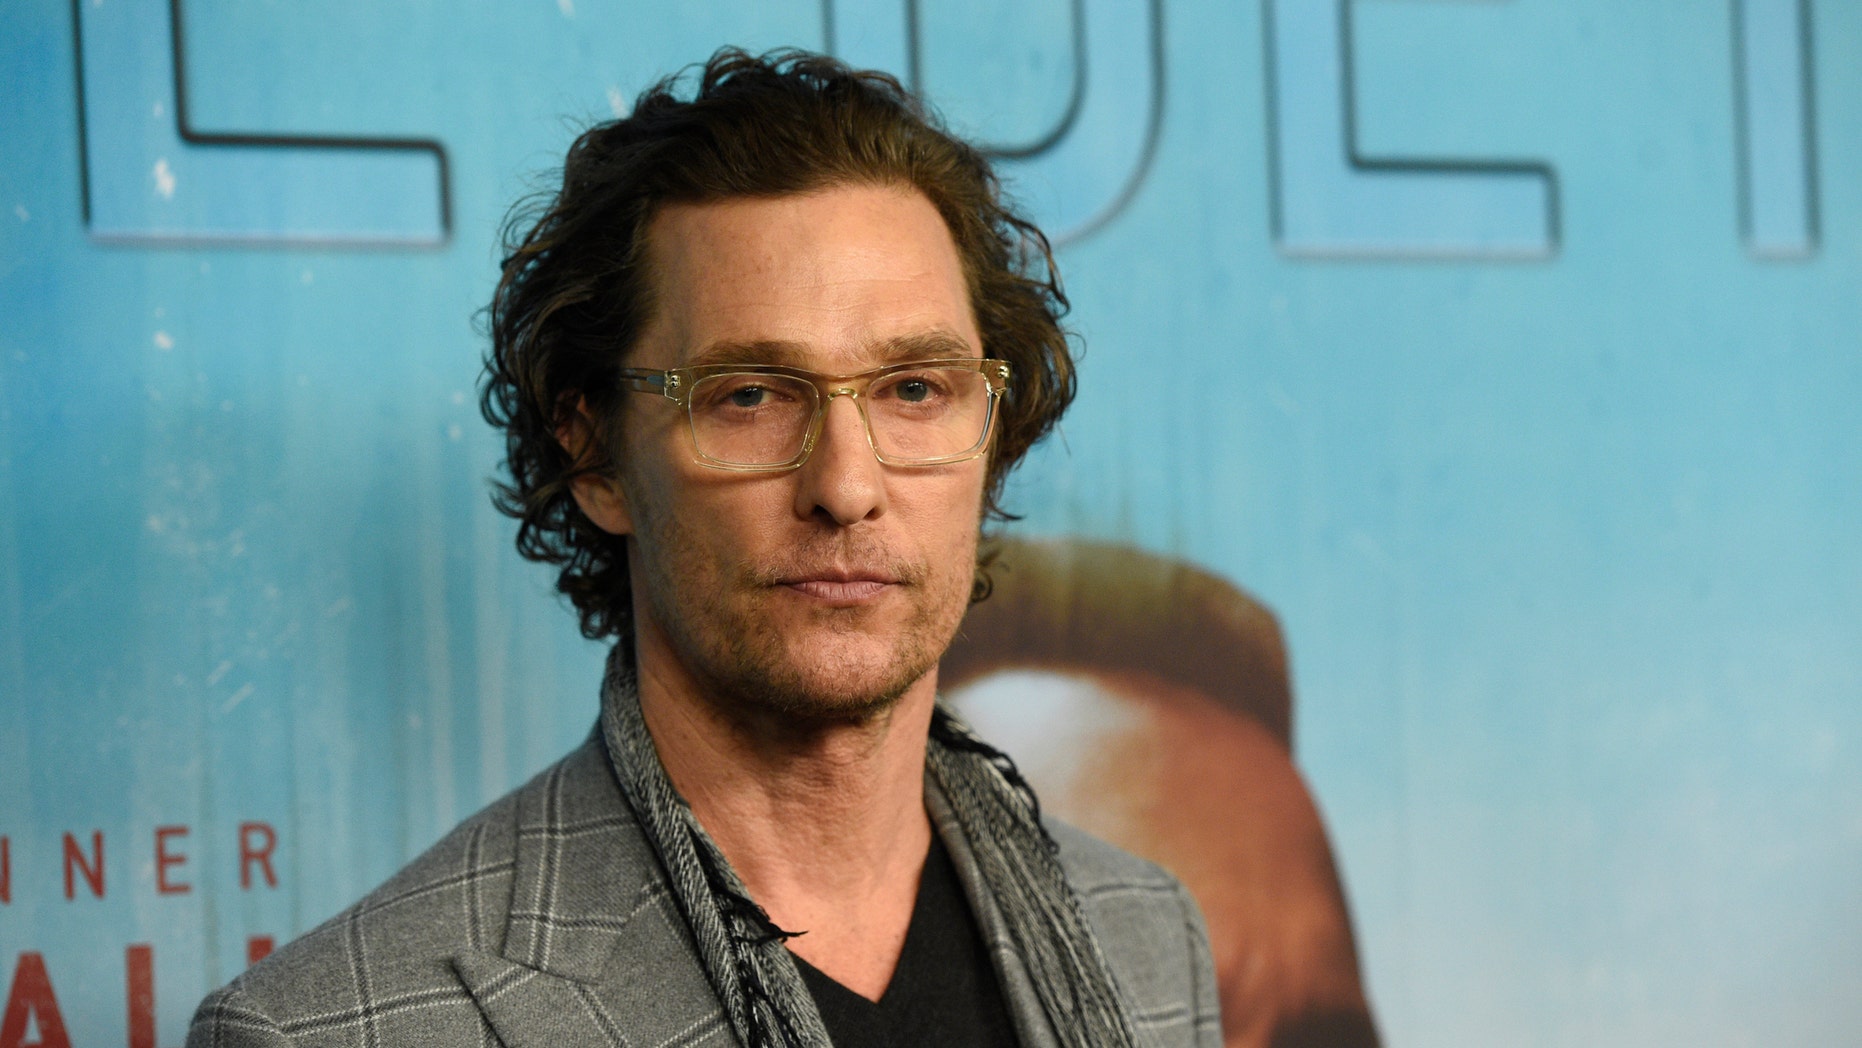 Matthew McConaughey calls for action after deadly elementary school shooting in his Texas hometown